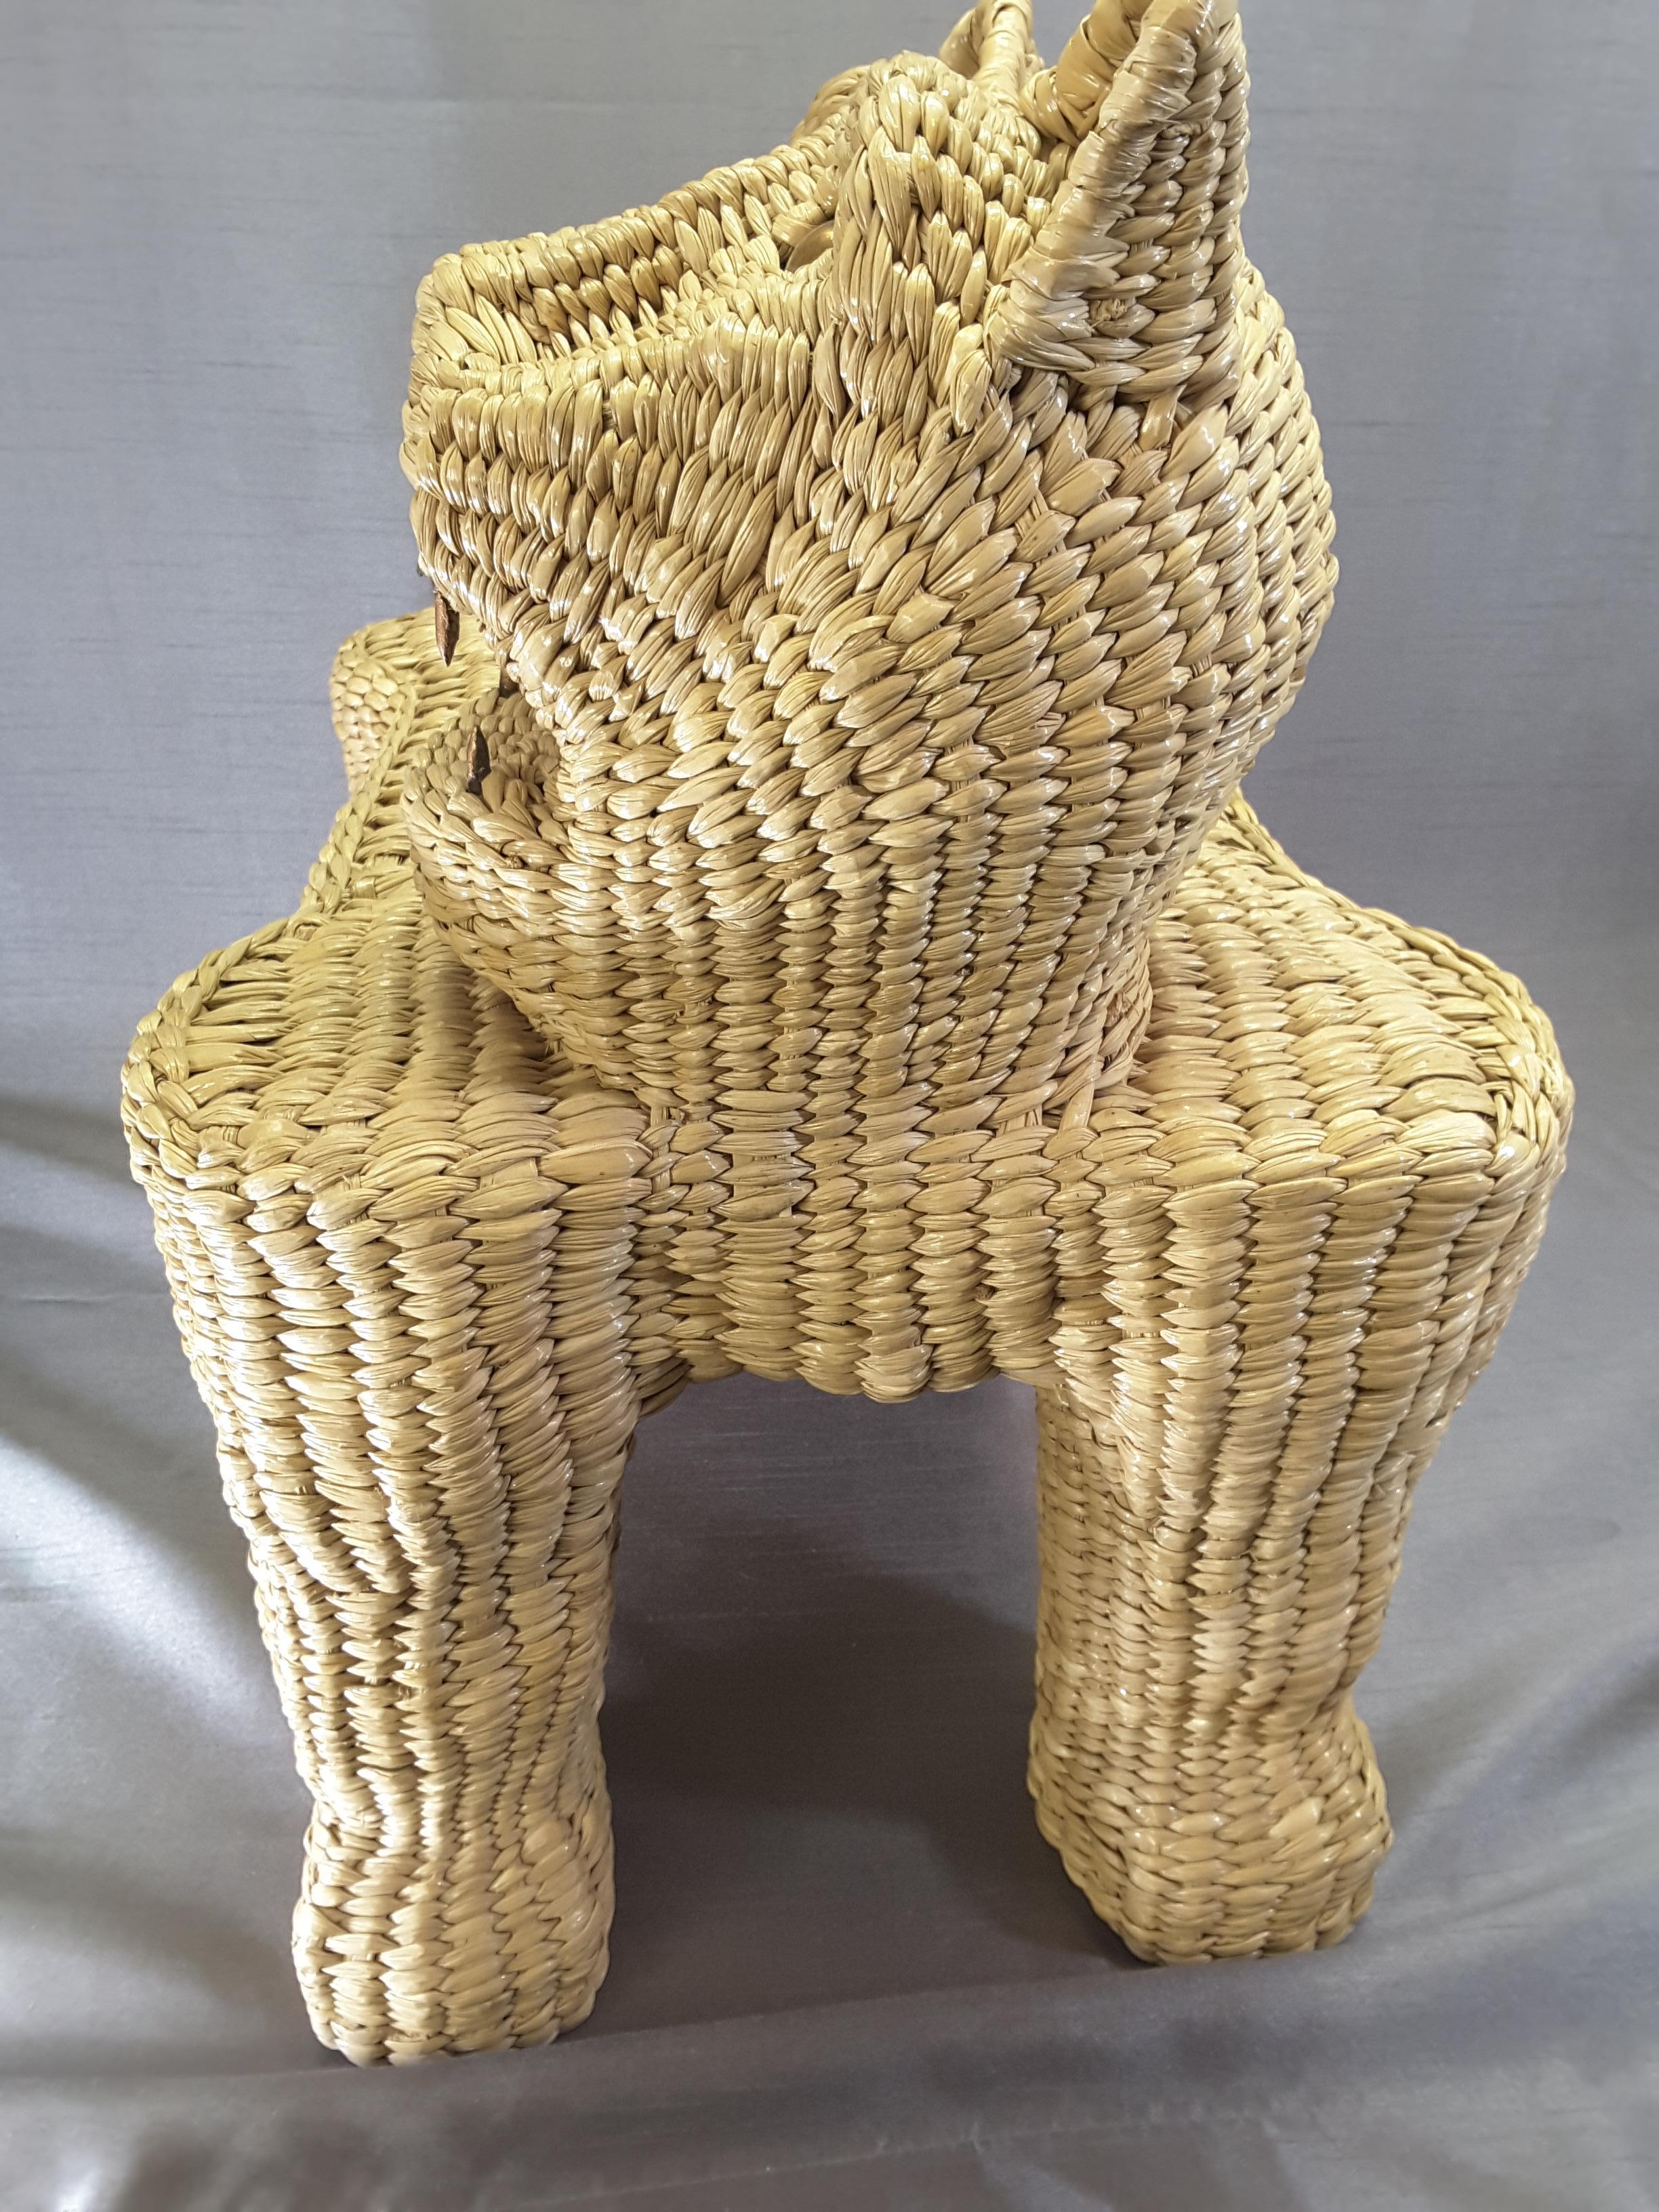 Mario Lopez Torres Wicker Panther Stool, Early 1970s For Sale 4